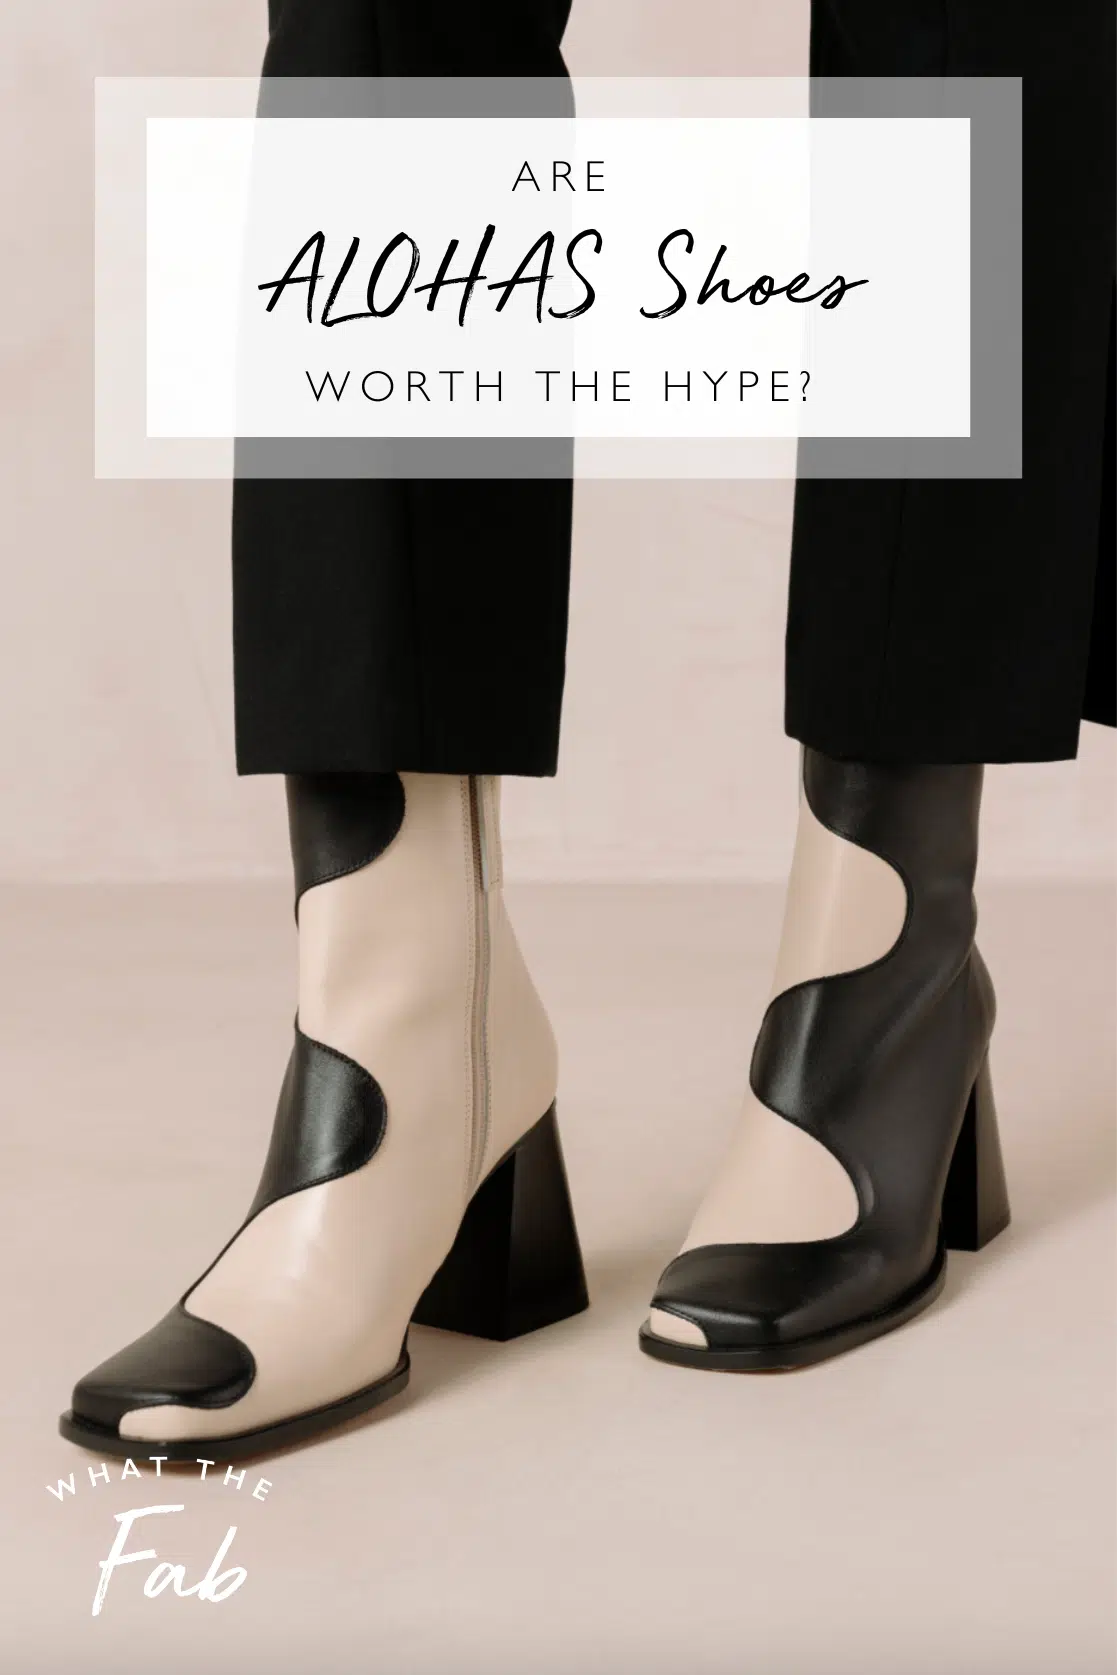 Are ALOHAS Shoes Worth the Hype?